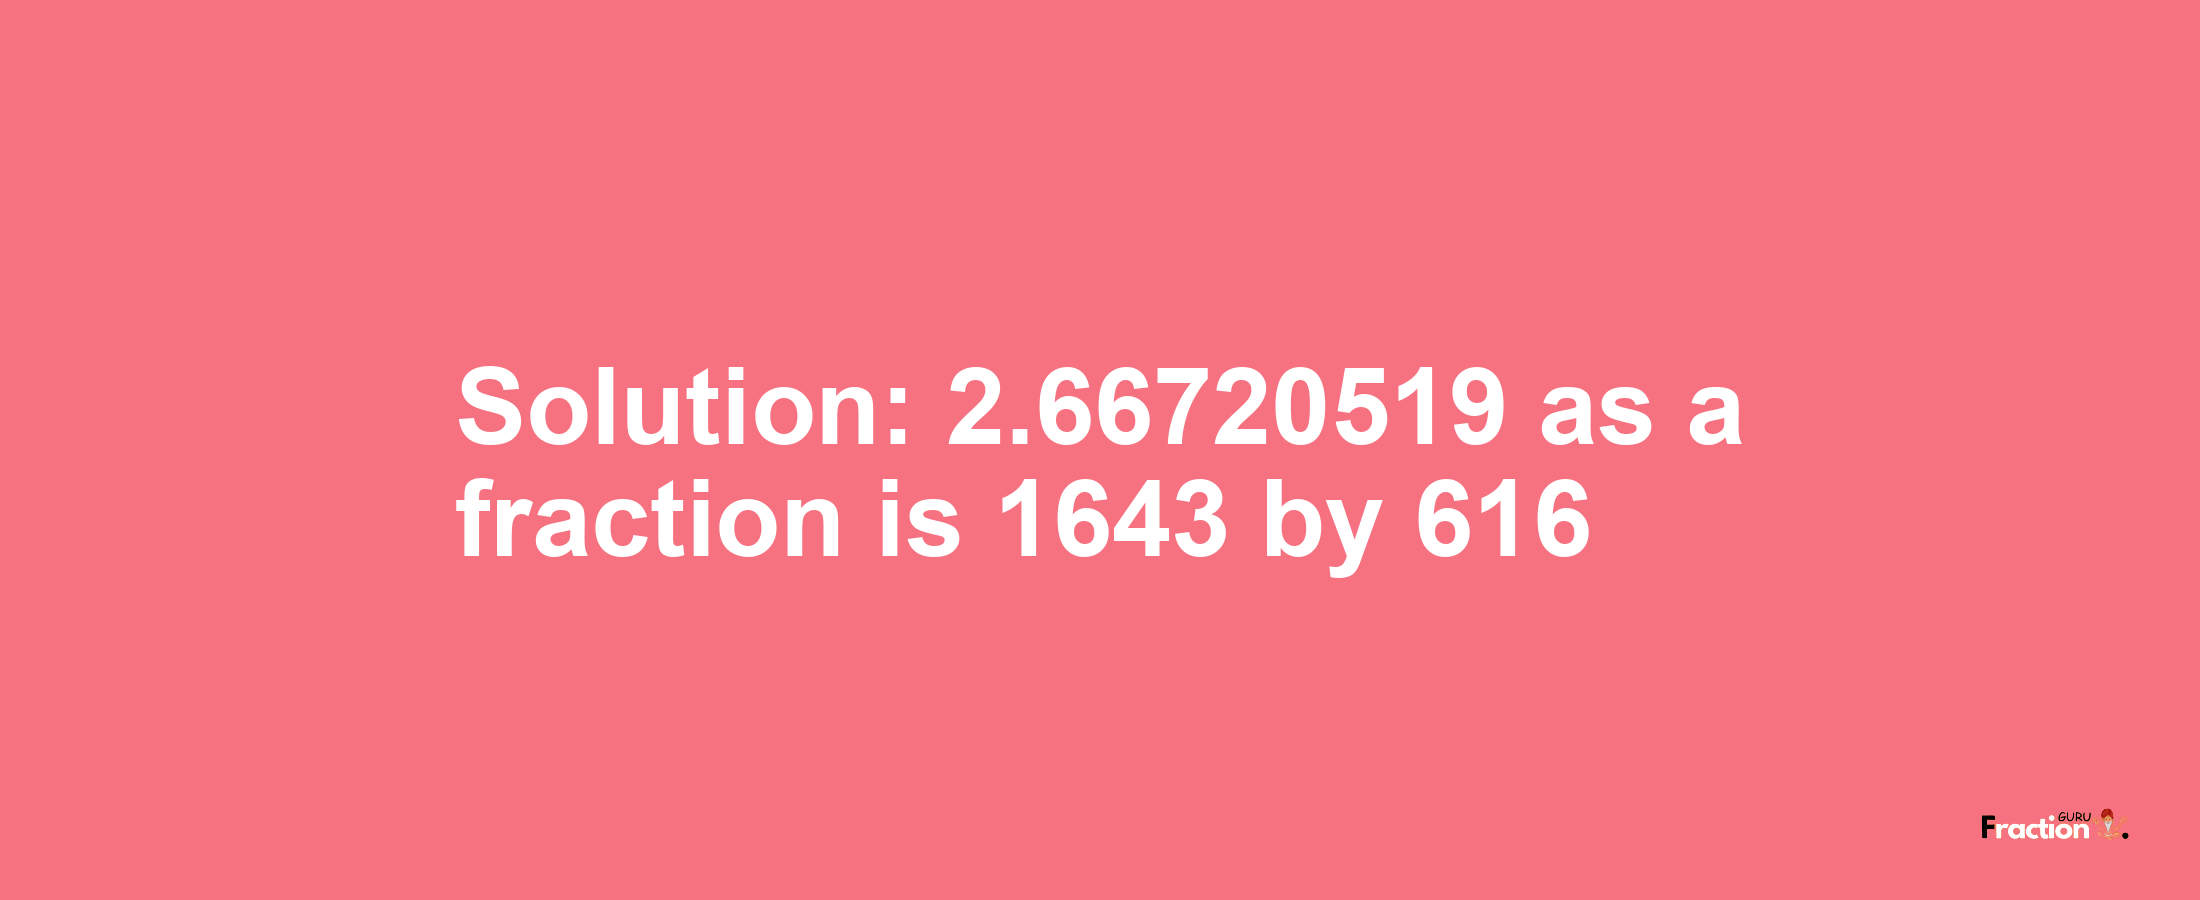 Solution:2.66720519 as a fraction is 1643/616